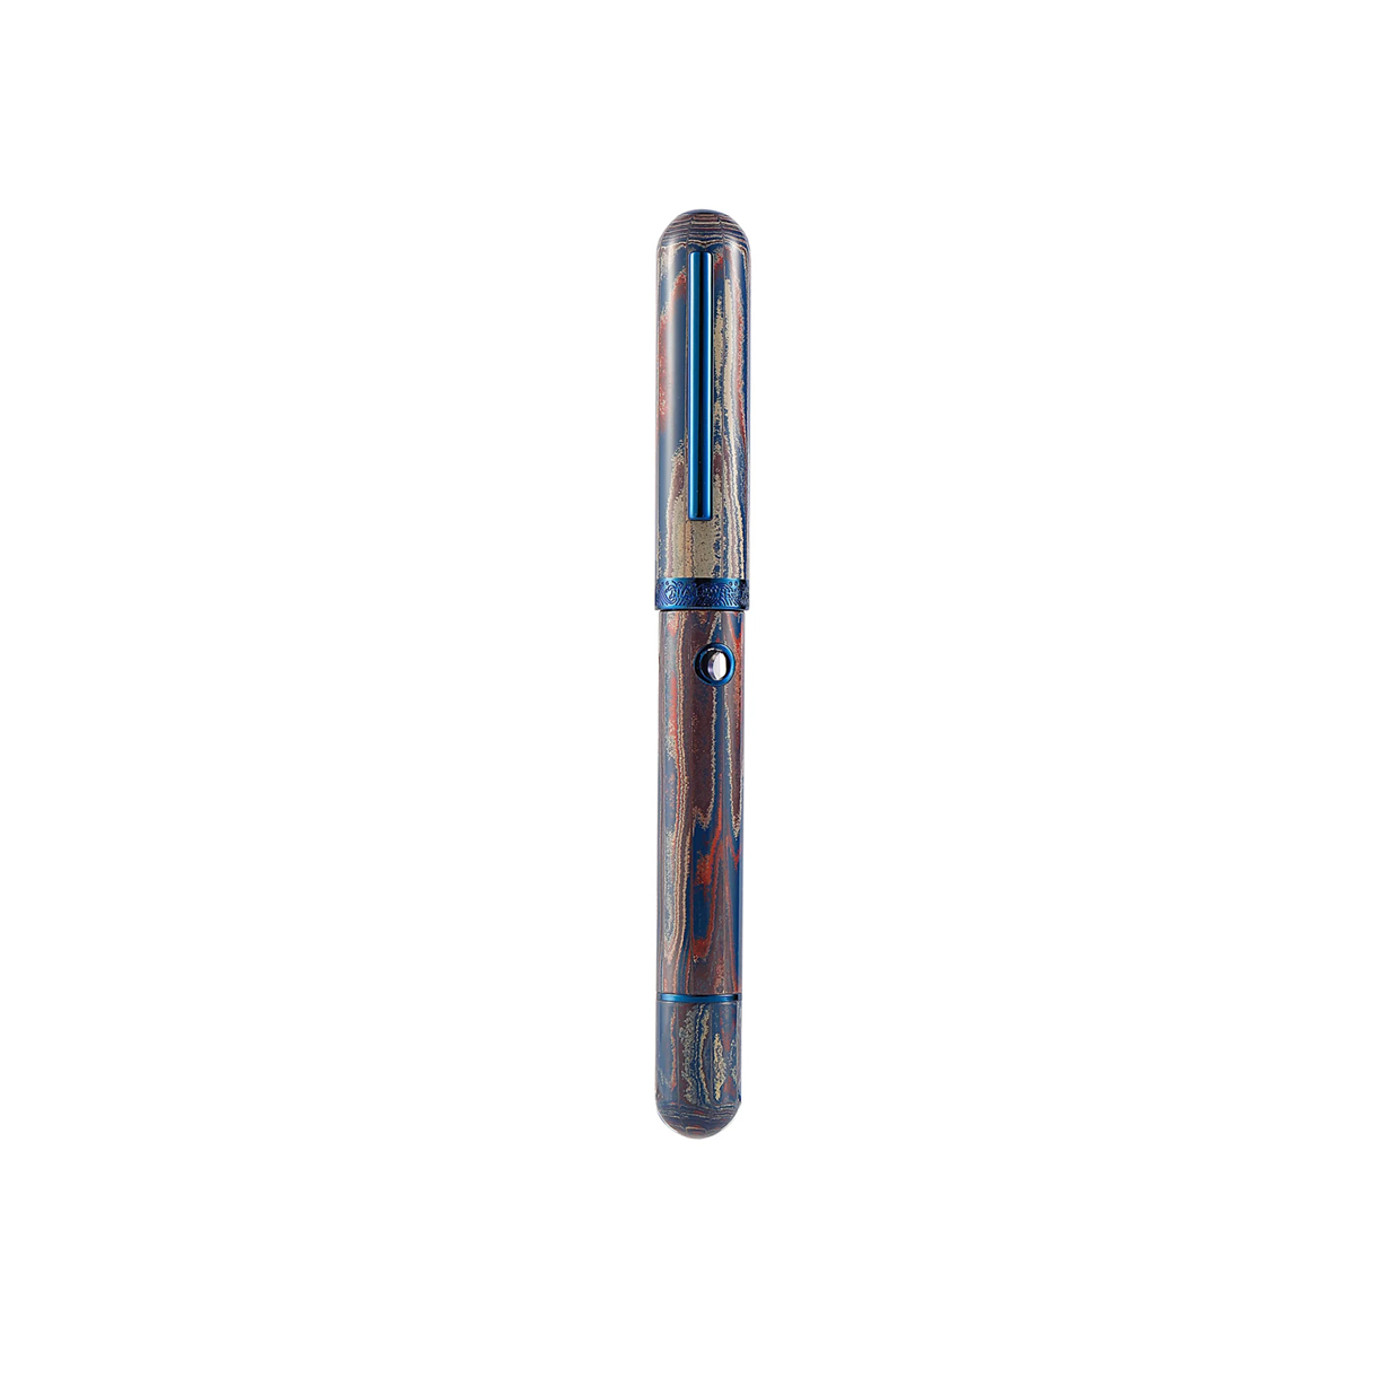 Nahvalur Nautilus fountain pen - The Blue Ringed (limited edition)